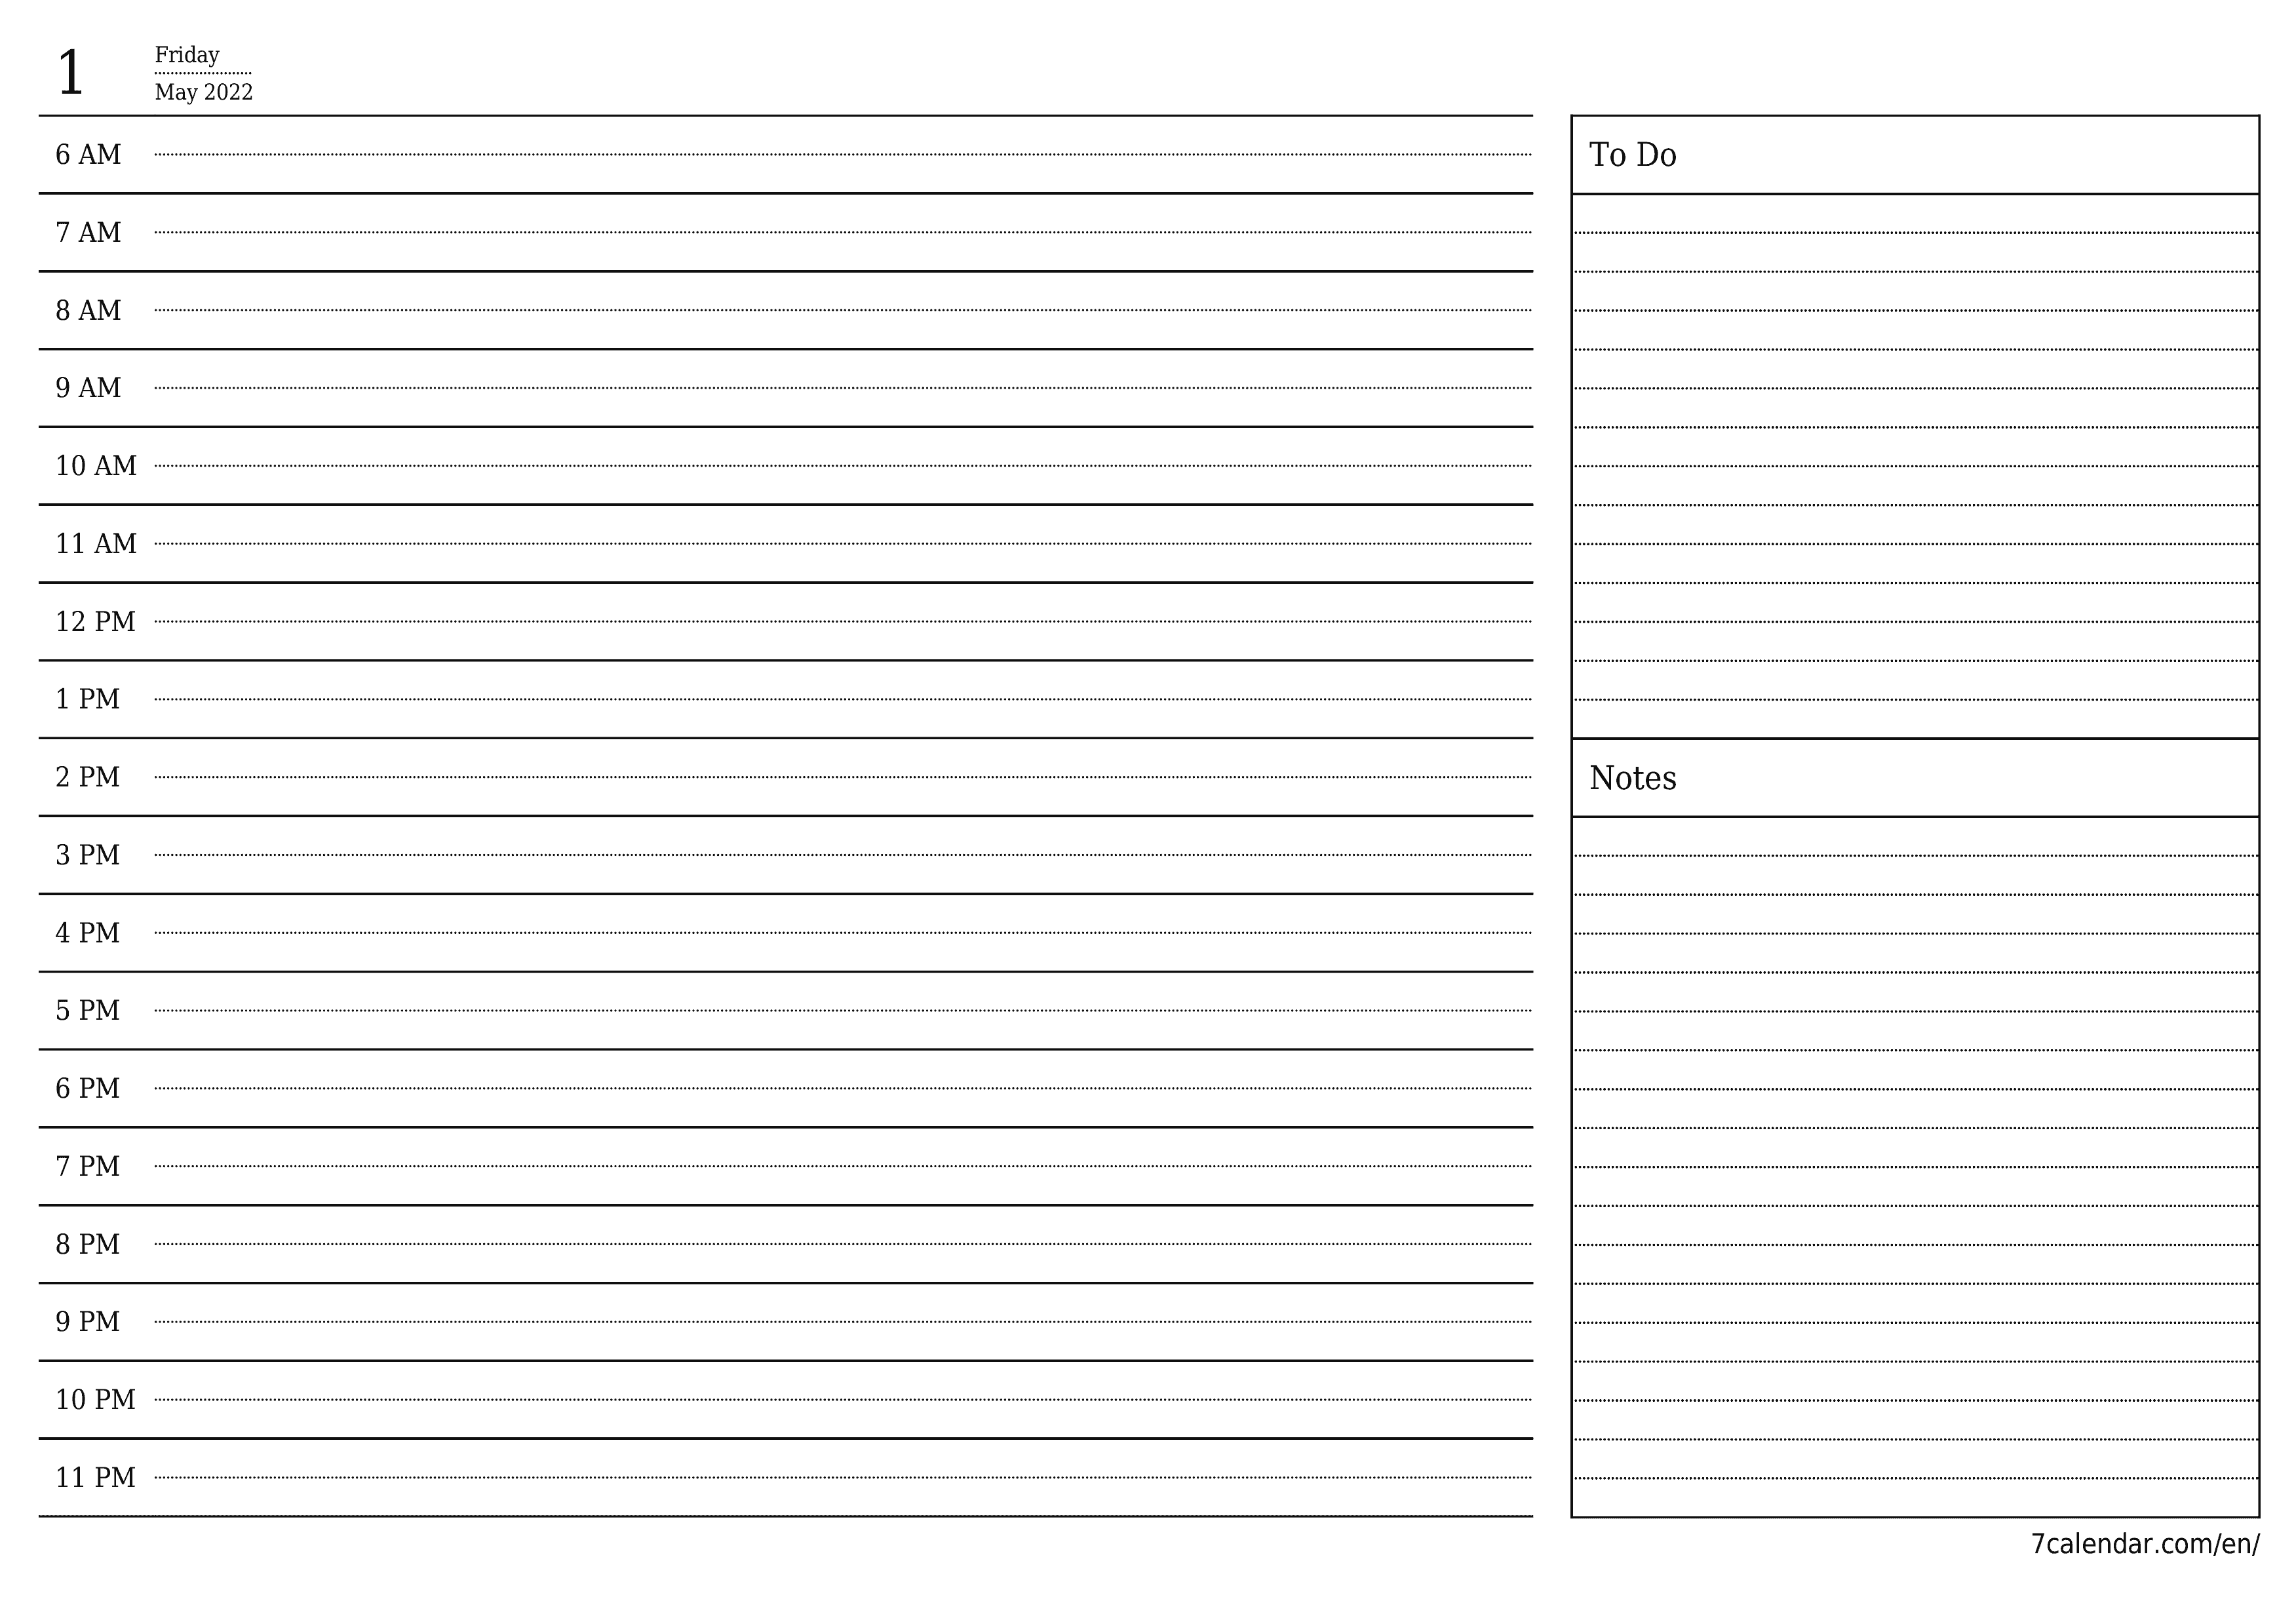 Blank daily calendar planner for day May 2022 with notes, save and print to PDF PNG English - 7calendar.com